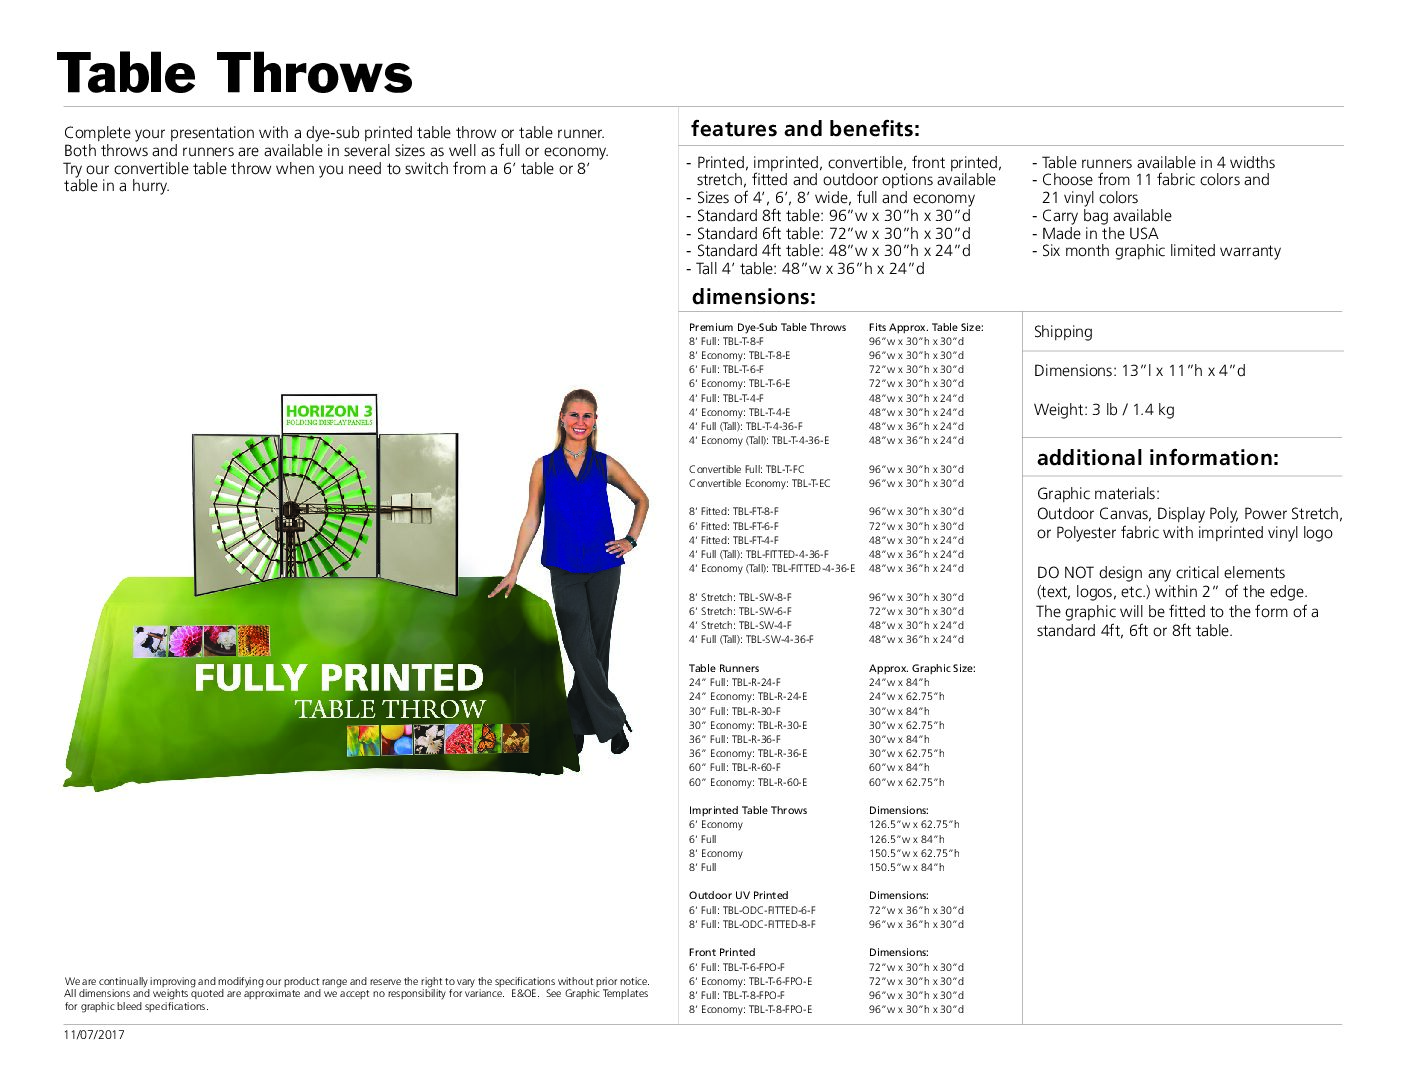 IS TableThrows pdf